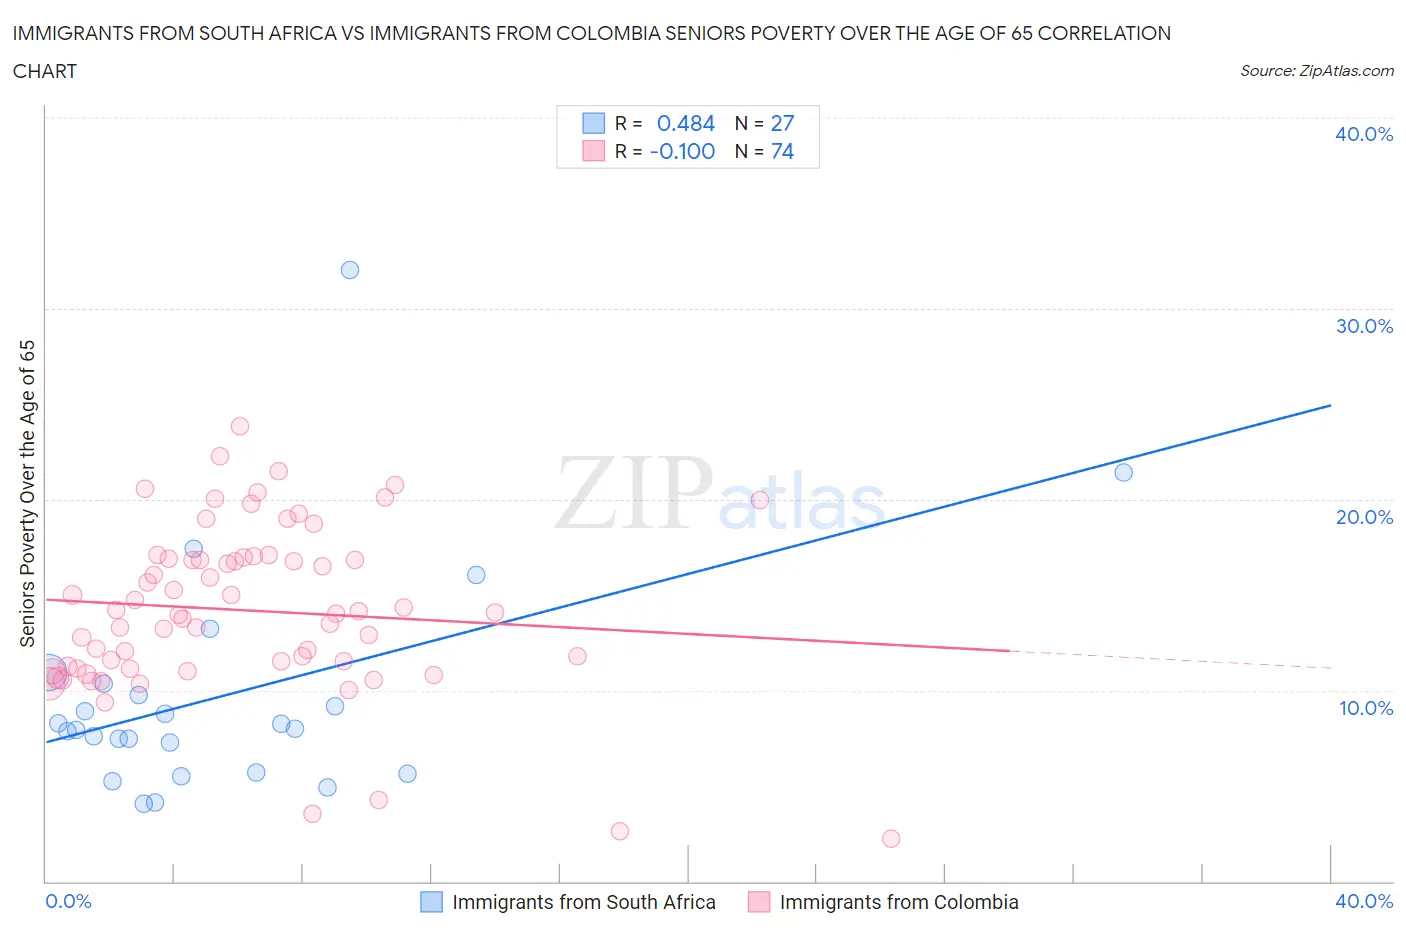 Immigrants from South Africa vs Immigrants from Colombia Seniors Poverty Over the Age of 65